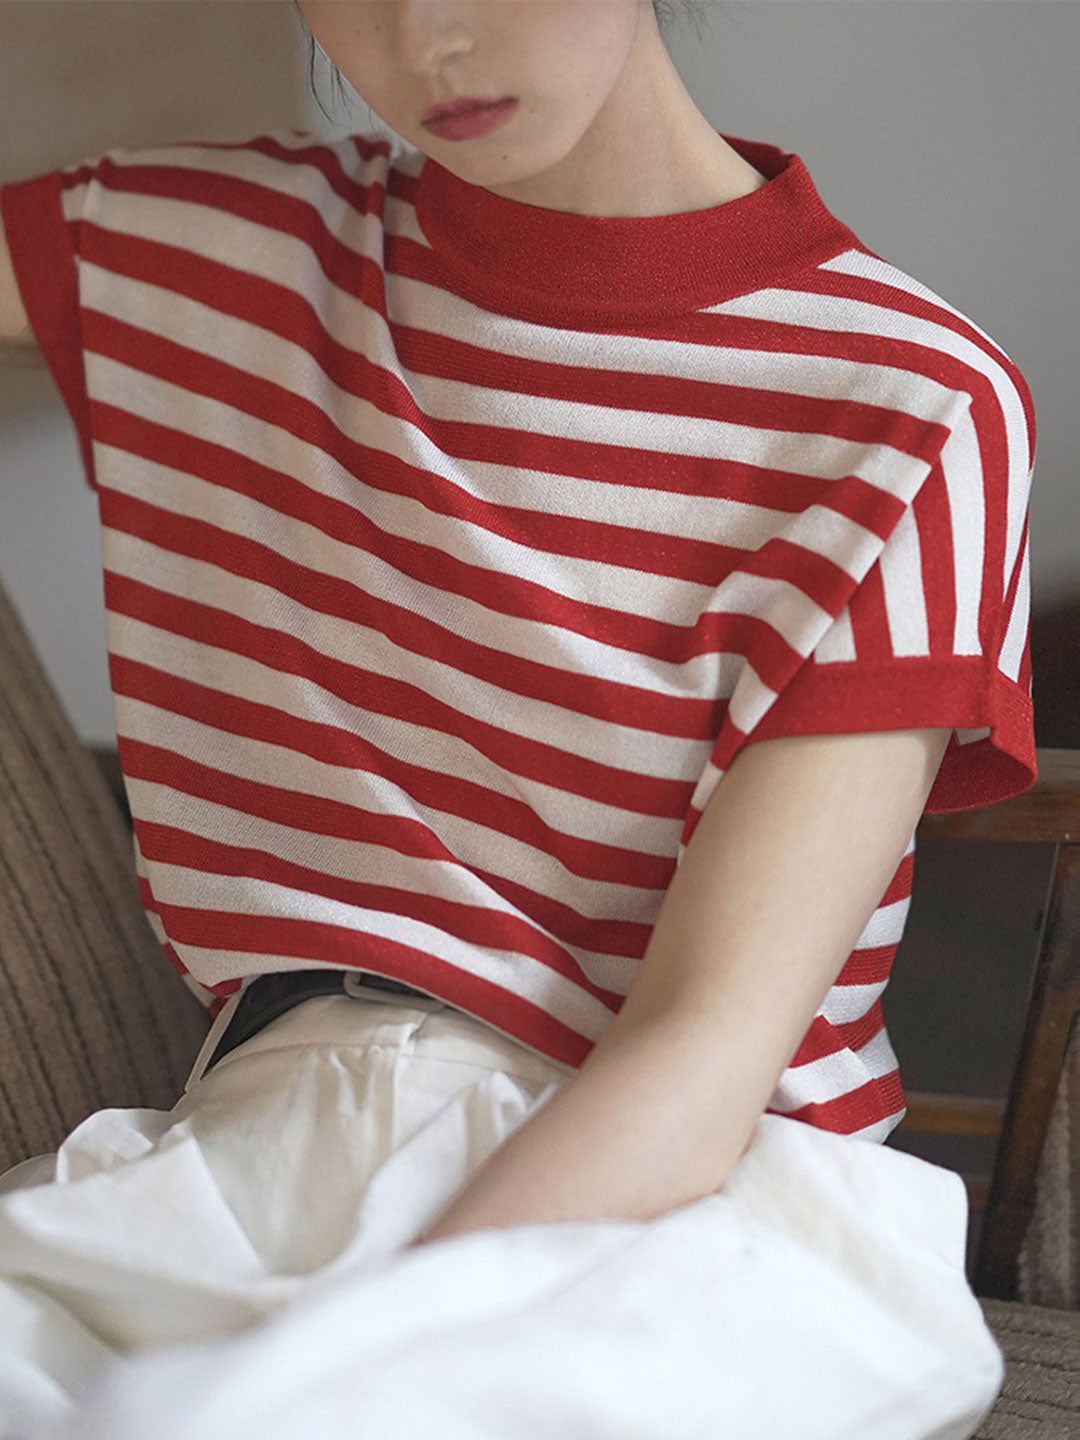 Lauren Classic Crew Neck Striped Contrast Knitted Top